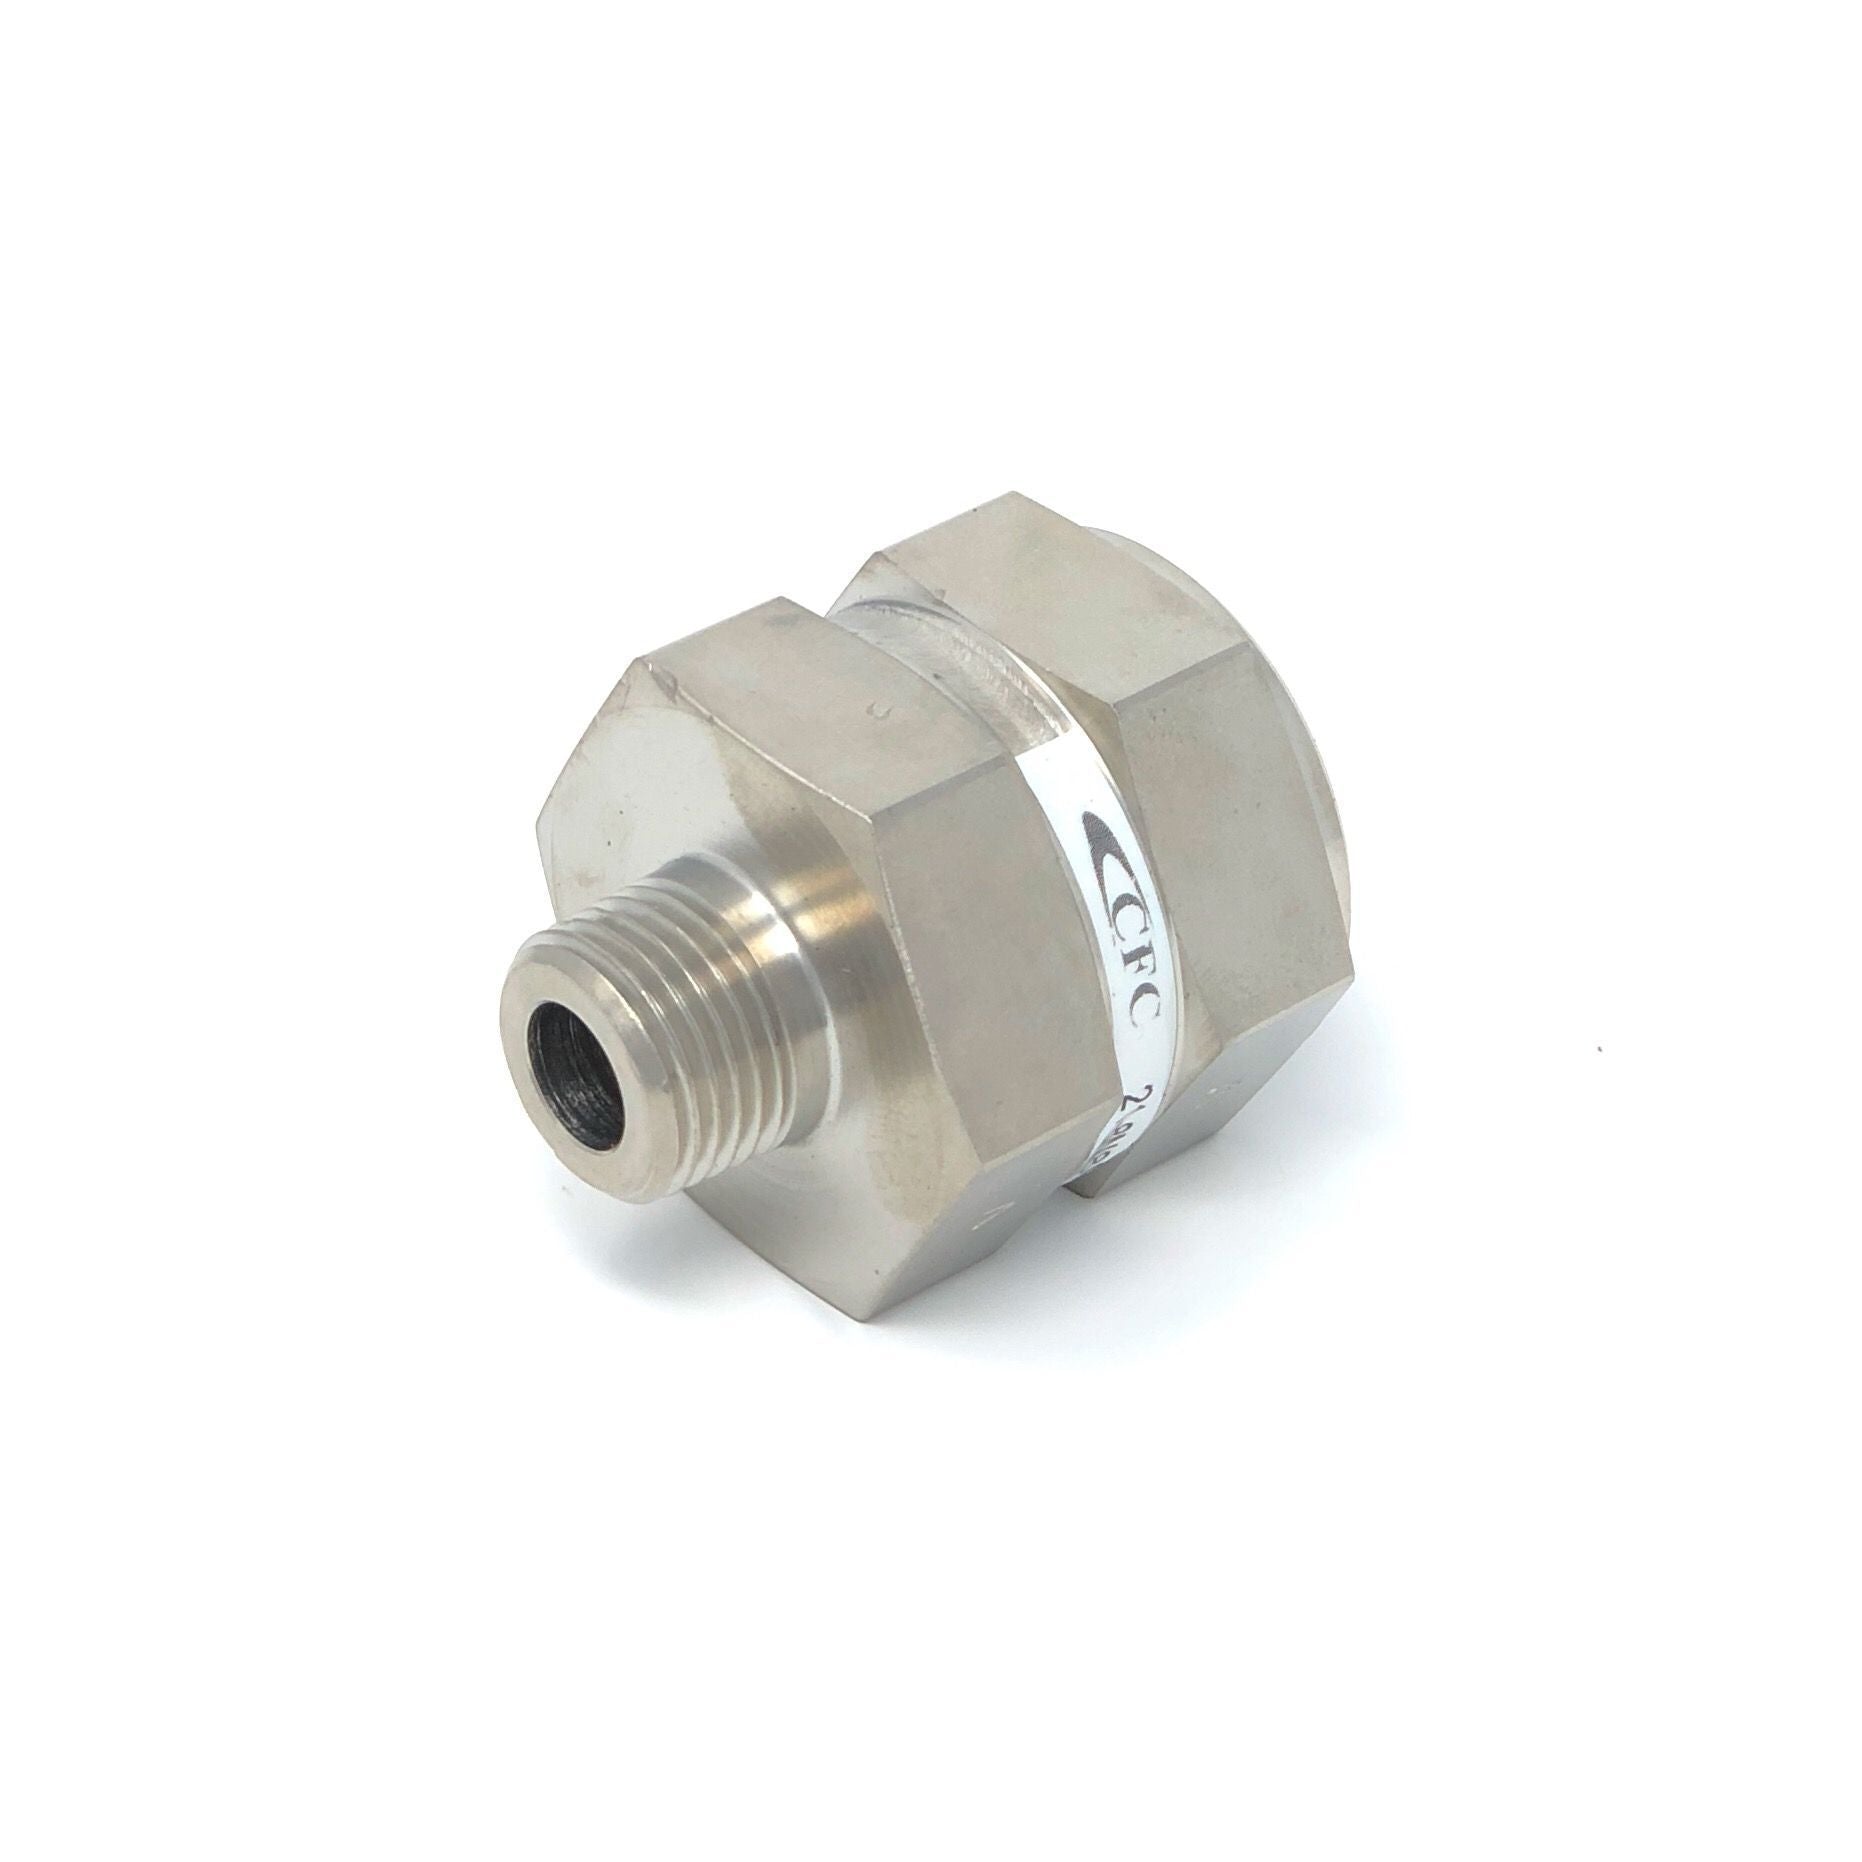 21-4N4N-10S : Chase High Pressure Inline Filter, 6000psi, 1/4" NPT, 10 Micron, No Visual Indicator, No Bypass